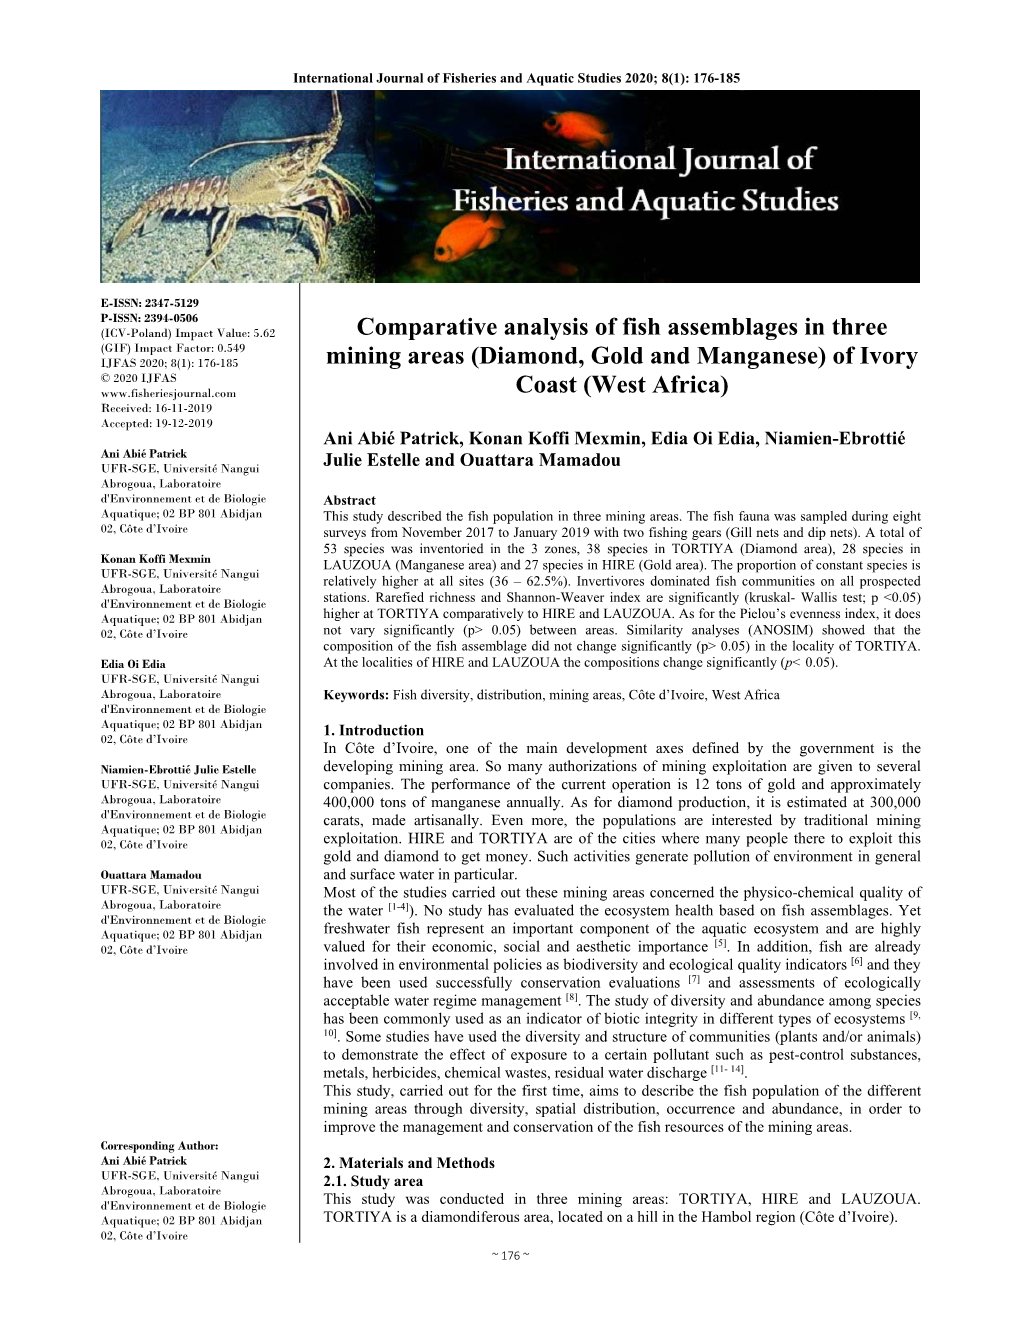 Comparative Analysis of Fish Assemblages in Three Mining Areas